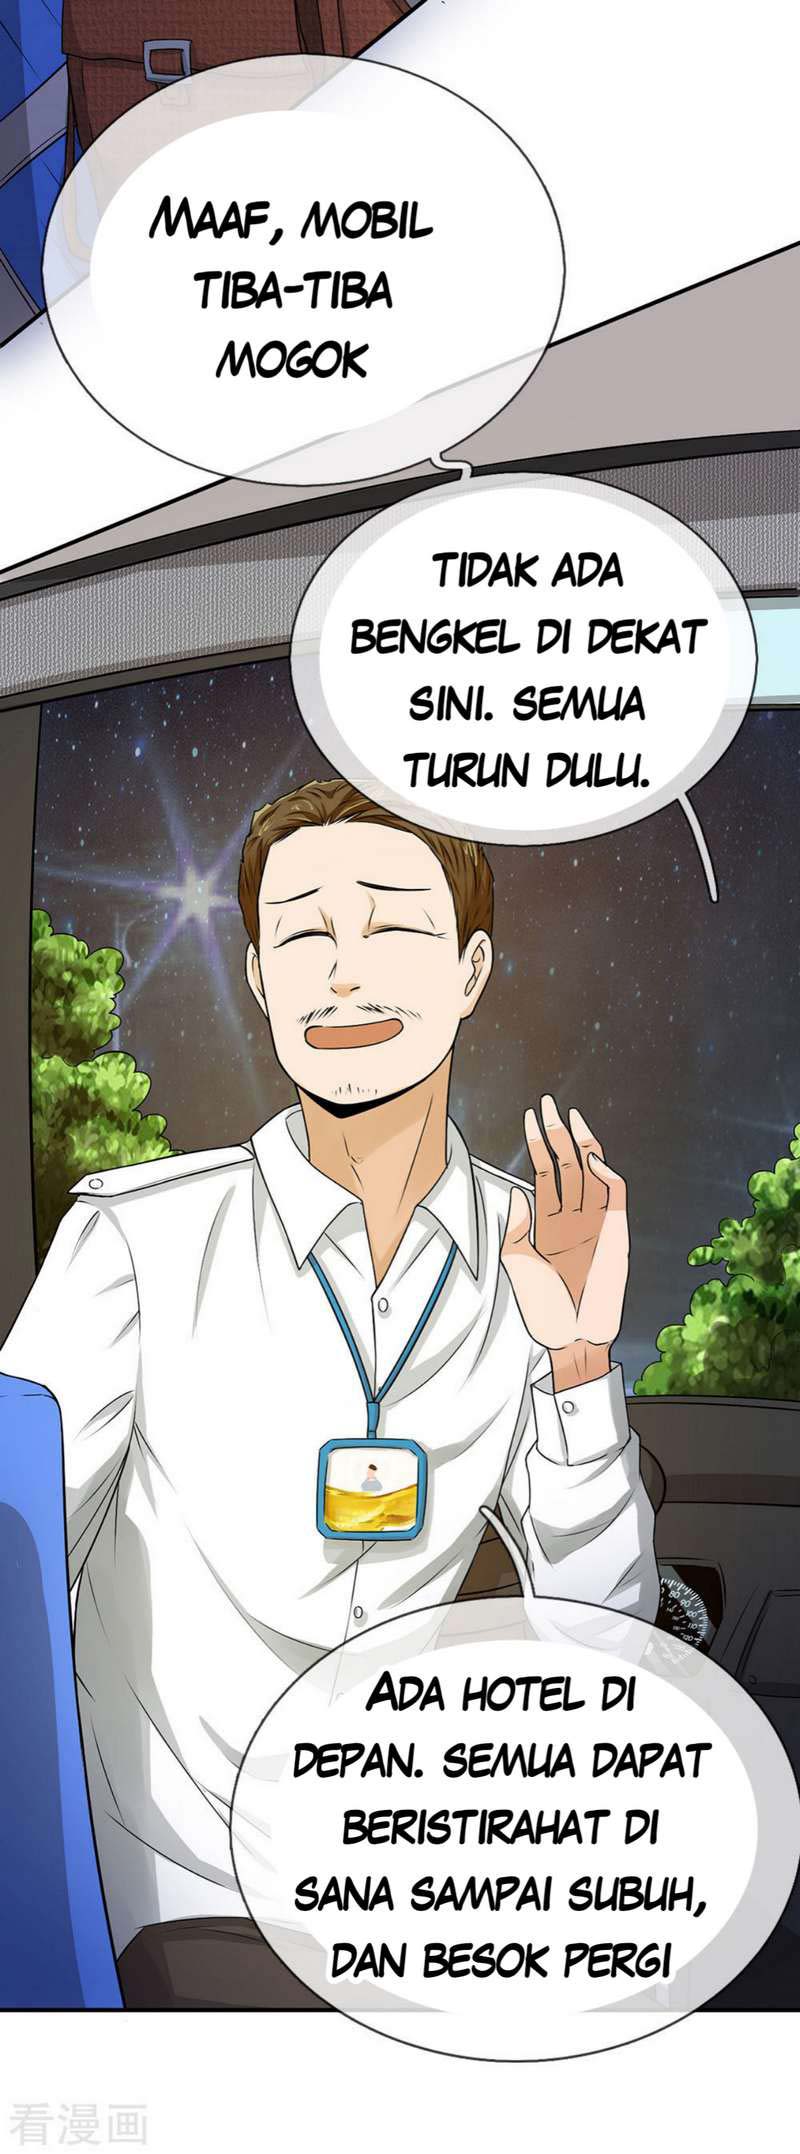 Super Medical Fairy in The City Chapter 02